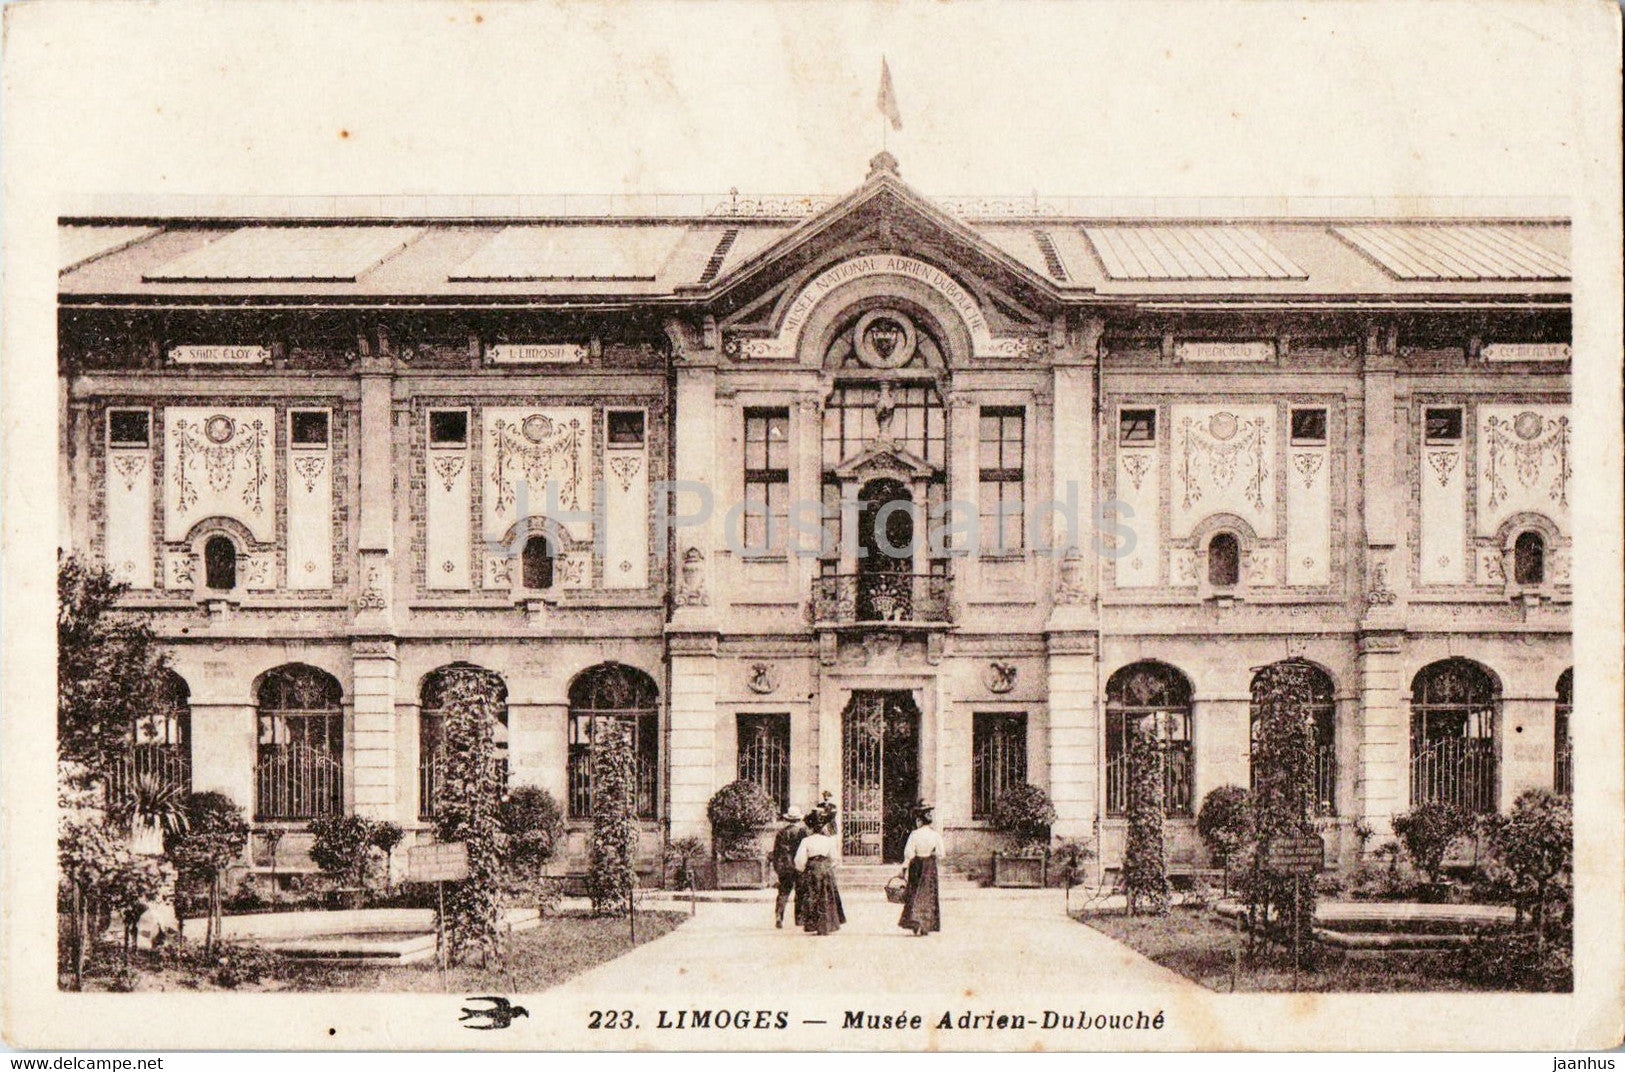 Limoges - Musee Adrien Dubouche - museum - 223 - old postcard - France - unused - JH Postcards